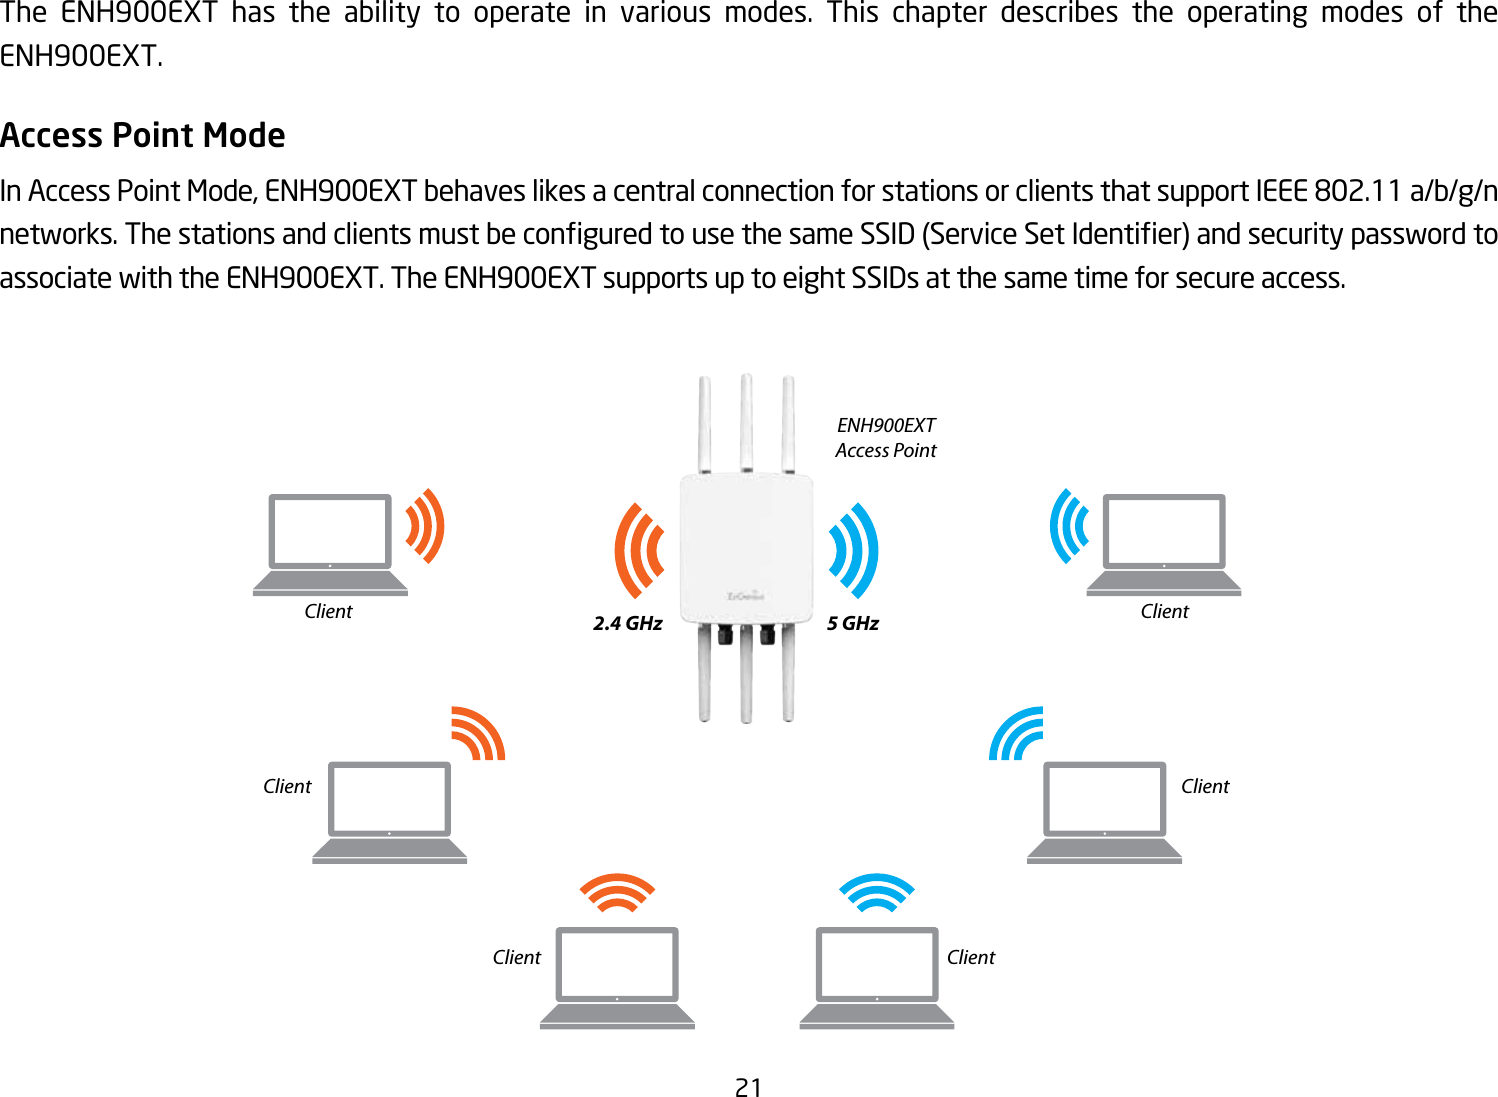 21 The ENH900EXT has the ability to operate in various modes. This chapter describes the operating modes of the ENH900EXT.Access Point ModeInAccessPointMode,ENH900EXTbehaveslikesacentralconnectionforstationsorclientsthatsupportIEEE802.11a/b/g/nnetworks.ThestationsandclientsmustbeconguredtousethesameSSID(ServiceSetIdentier)andsecuritypasswordtoassociate with the ENH900EXT. The ENH900EXT supports up to eight SSIDs at the same time for secure access.  ENH900EXTAccess Point ClientClient ClientClient ClientClient2.4 GHz 5 GHz